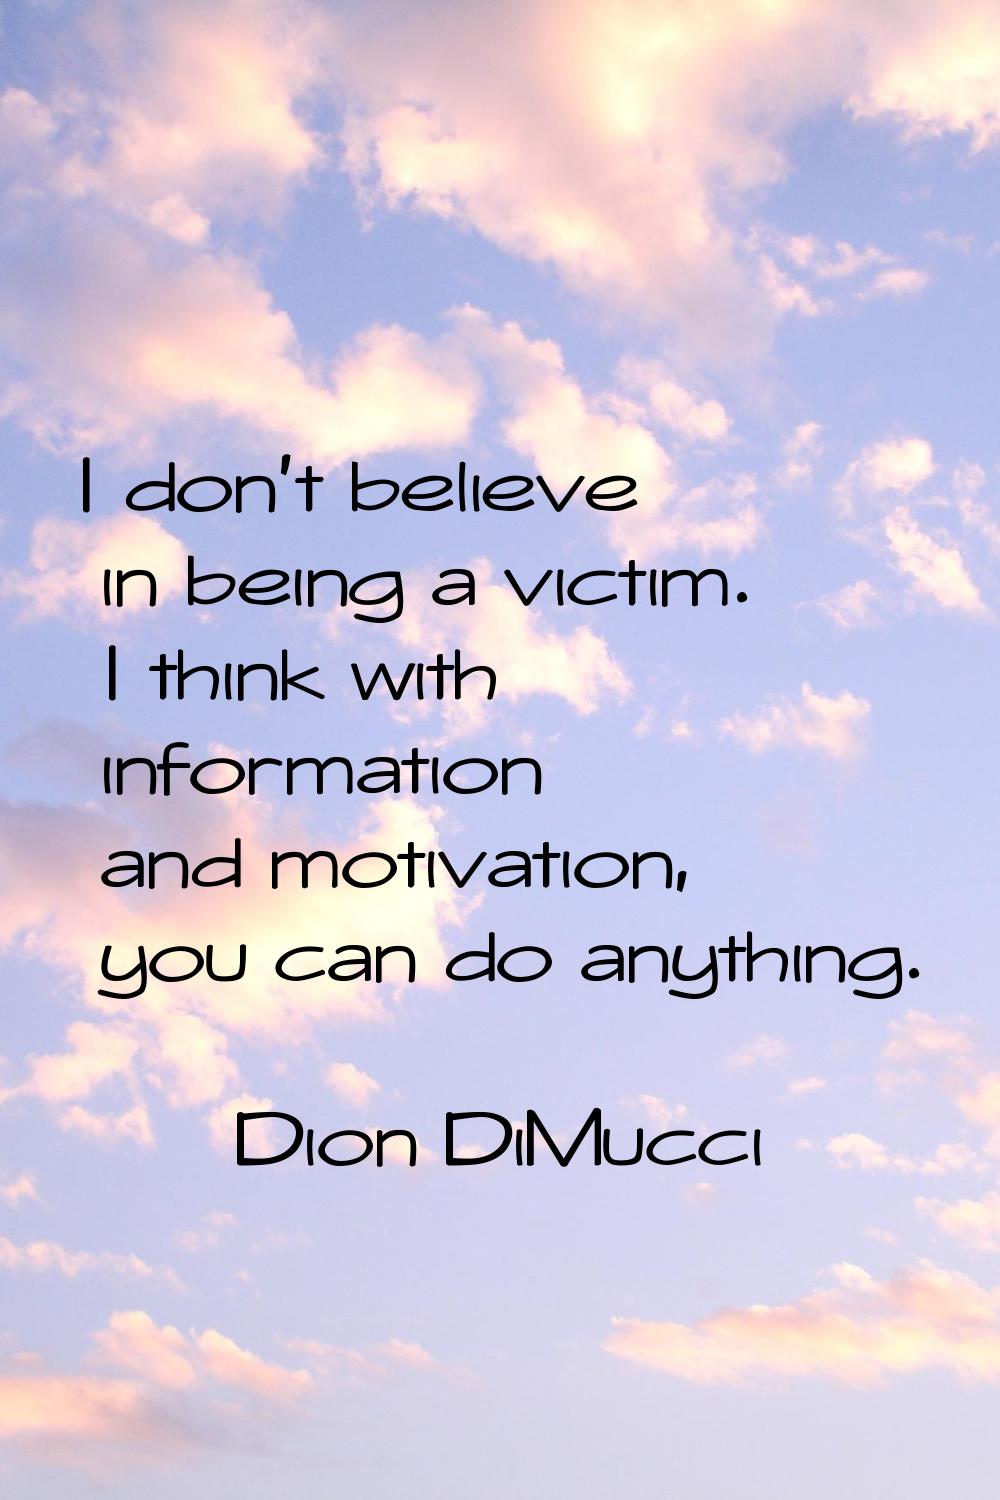 I don't believe in being a victim. I think with information and motivation, you can do anything.